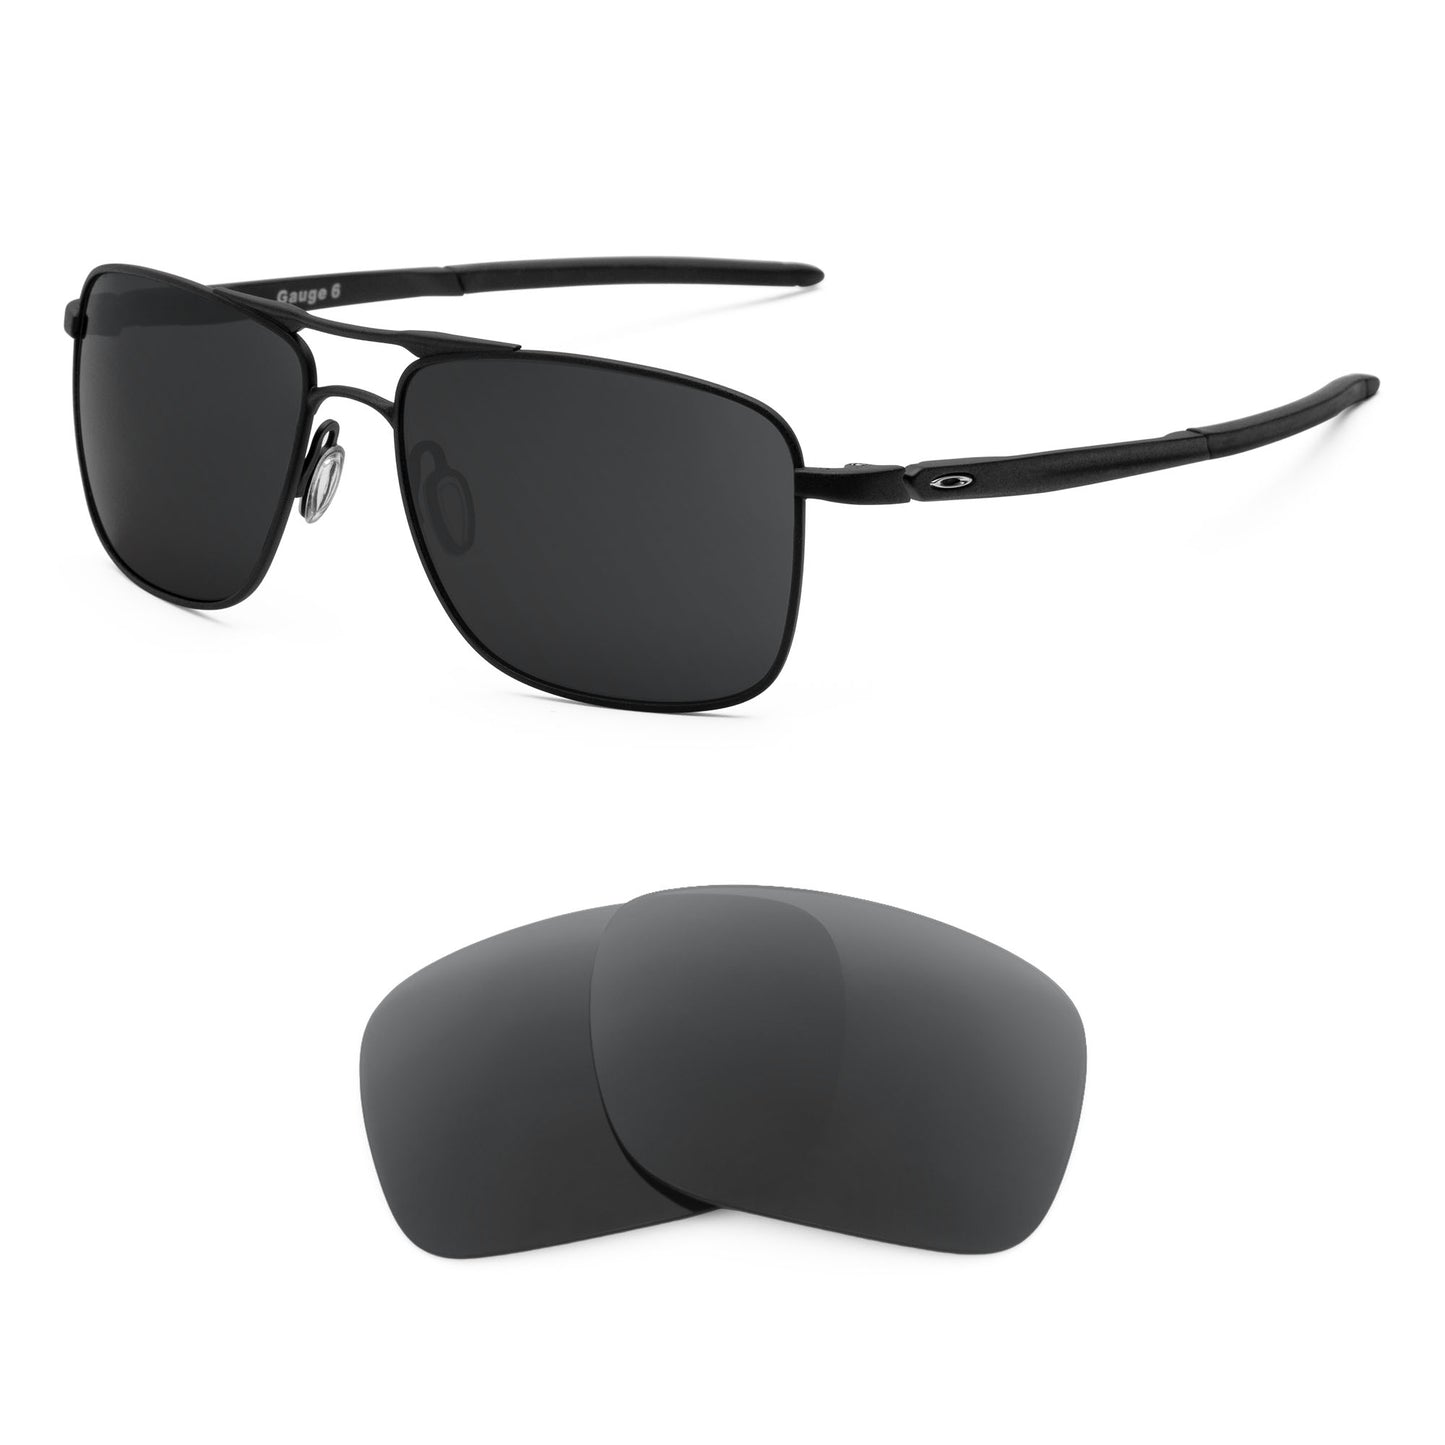 Oakley Gauge 6 sunglasses with replacement lenses